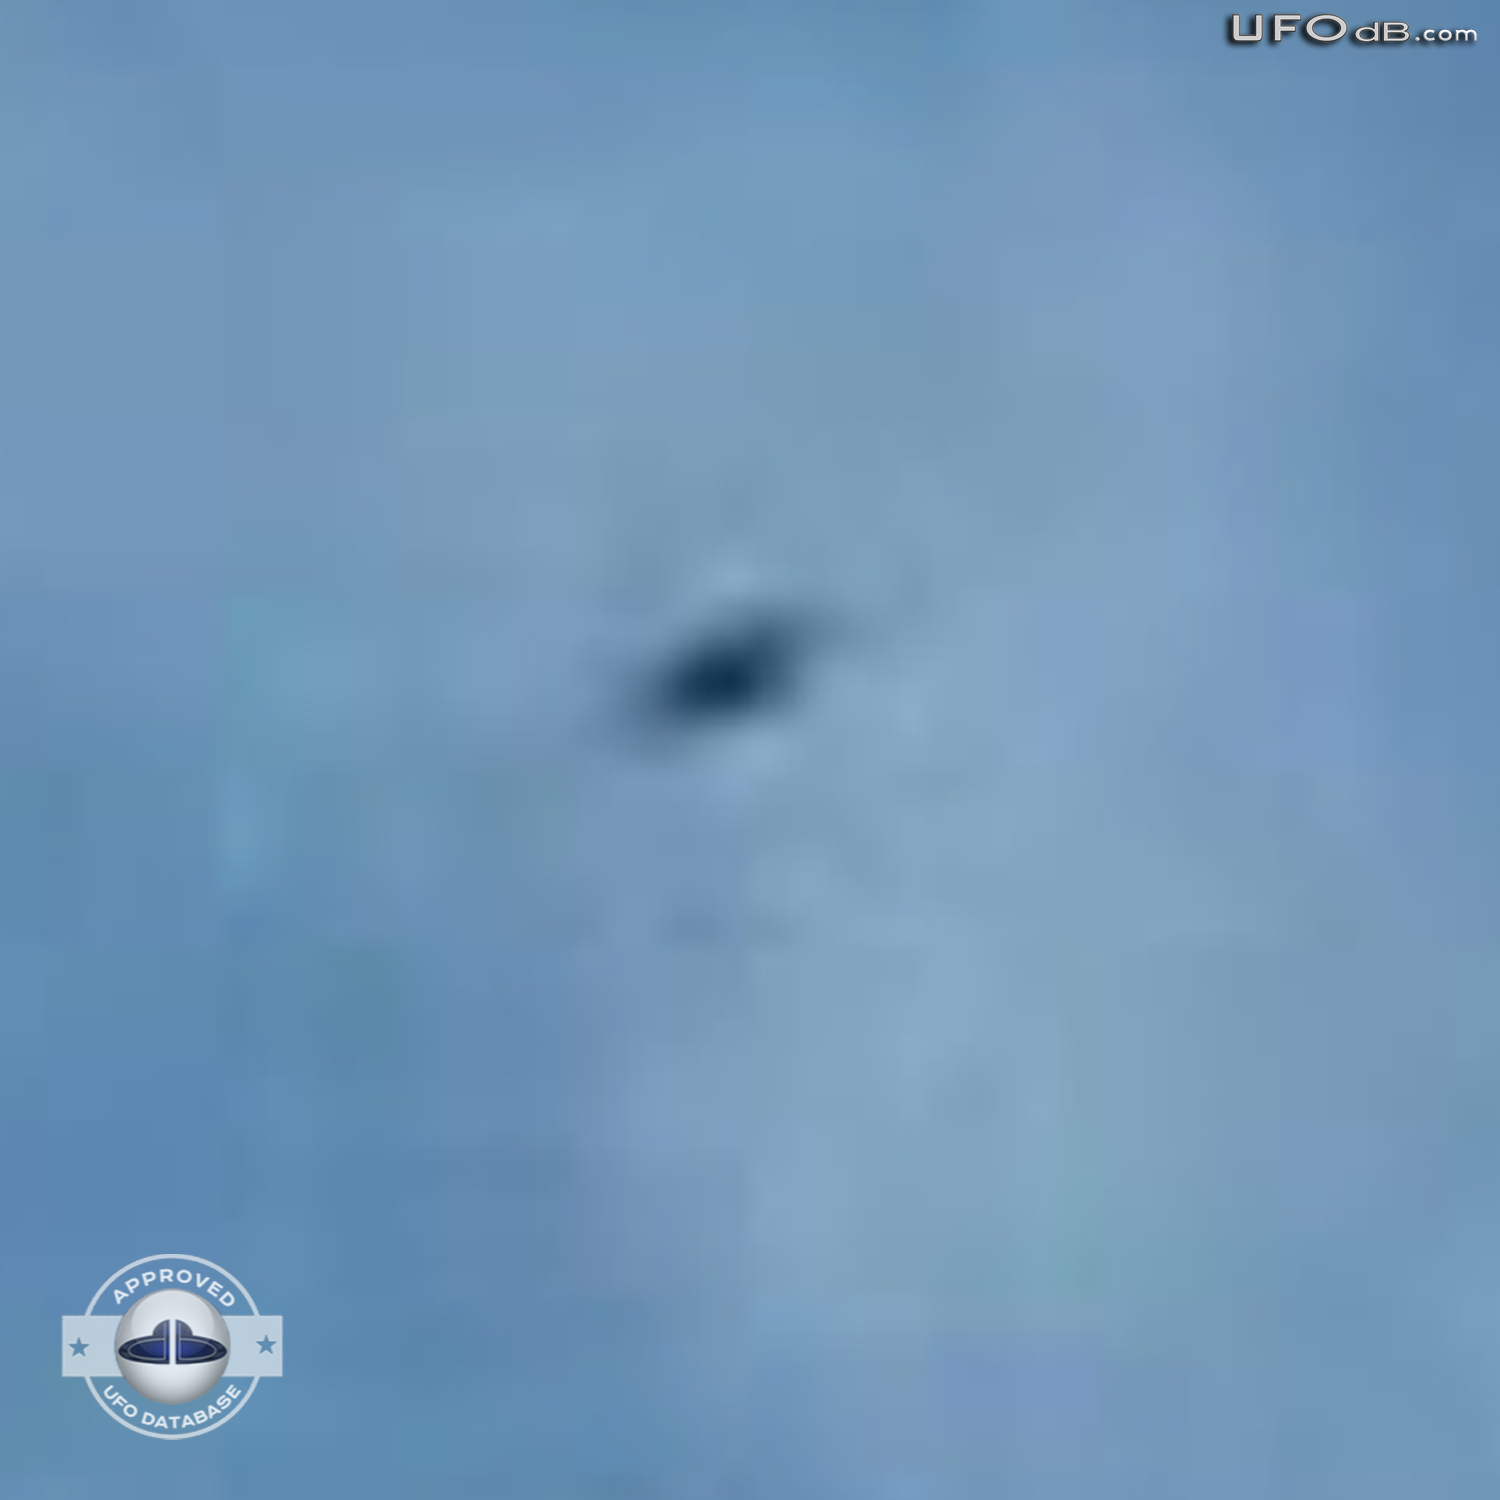 Three months of massive UFO sightings in Argentina | February 20 2011 UFO Picture #267-4